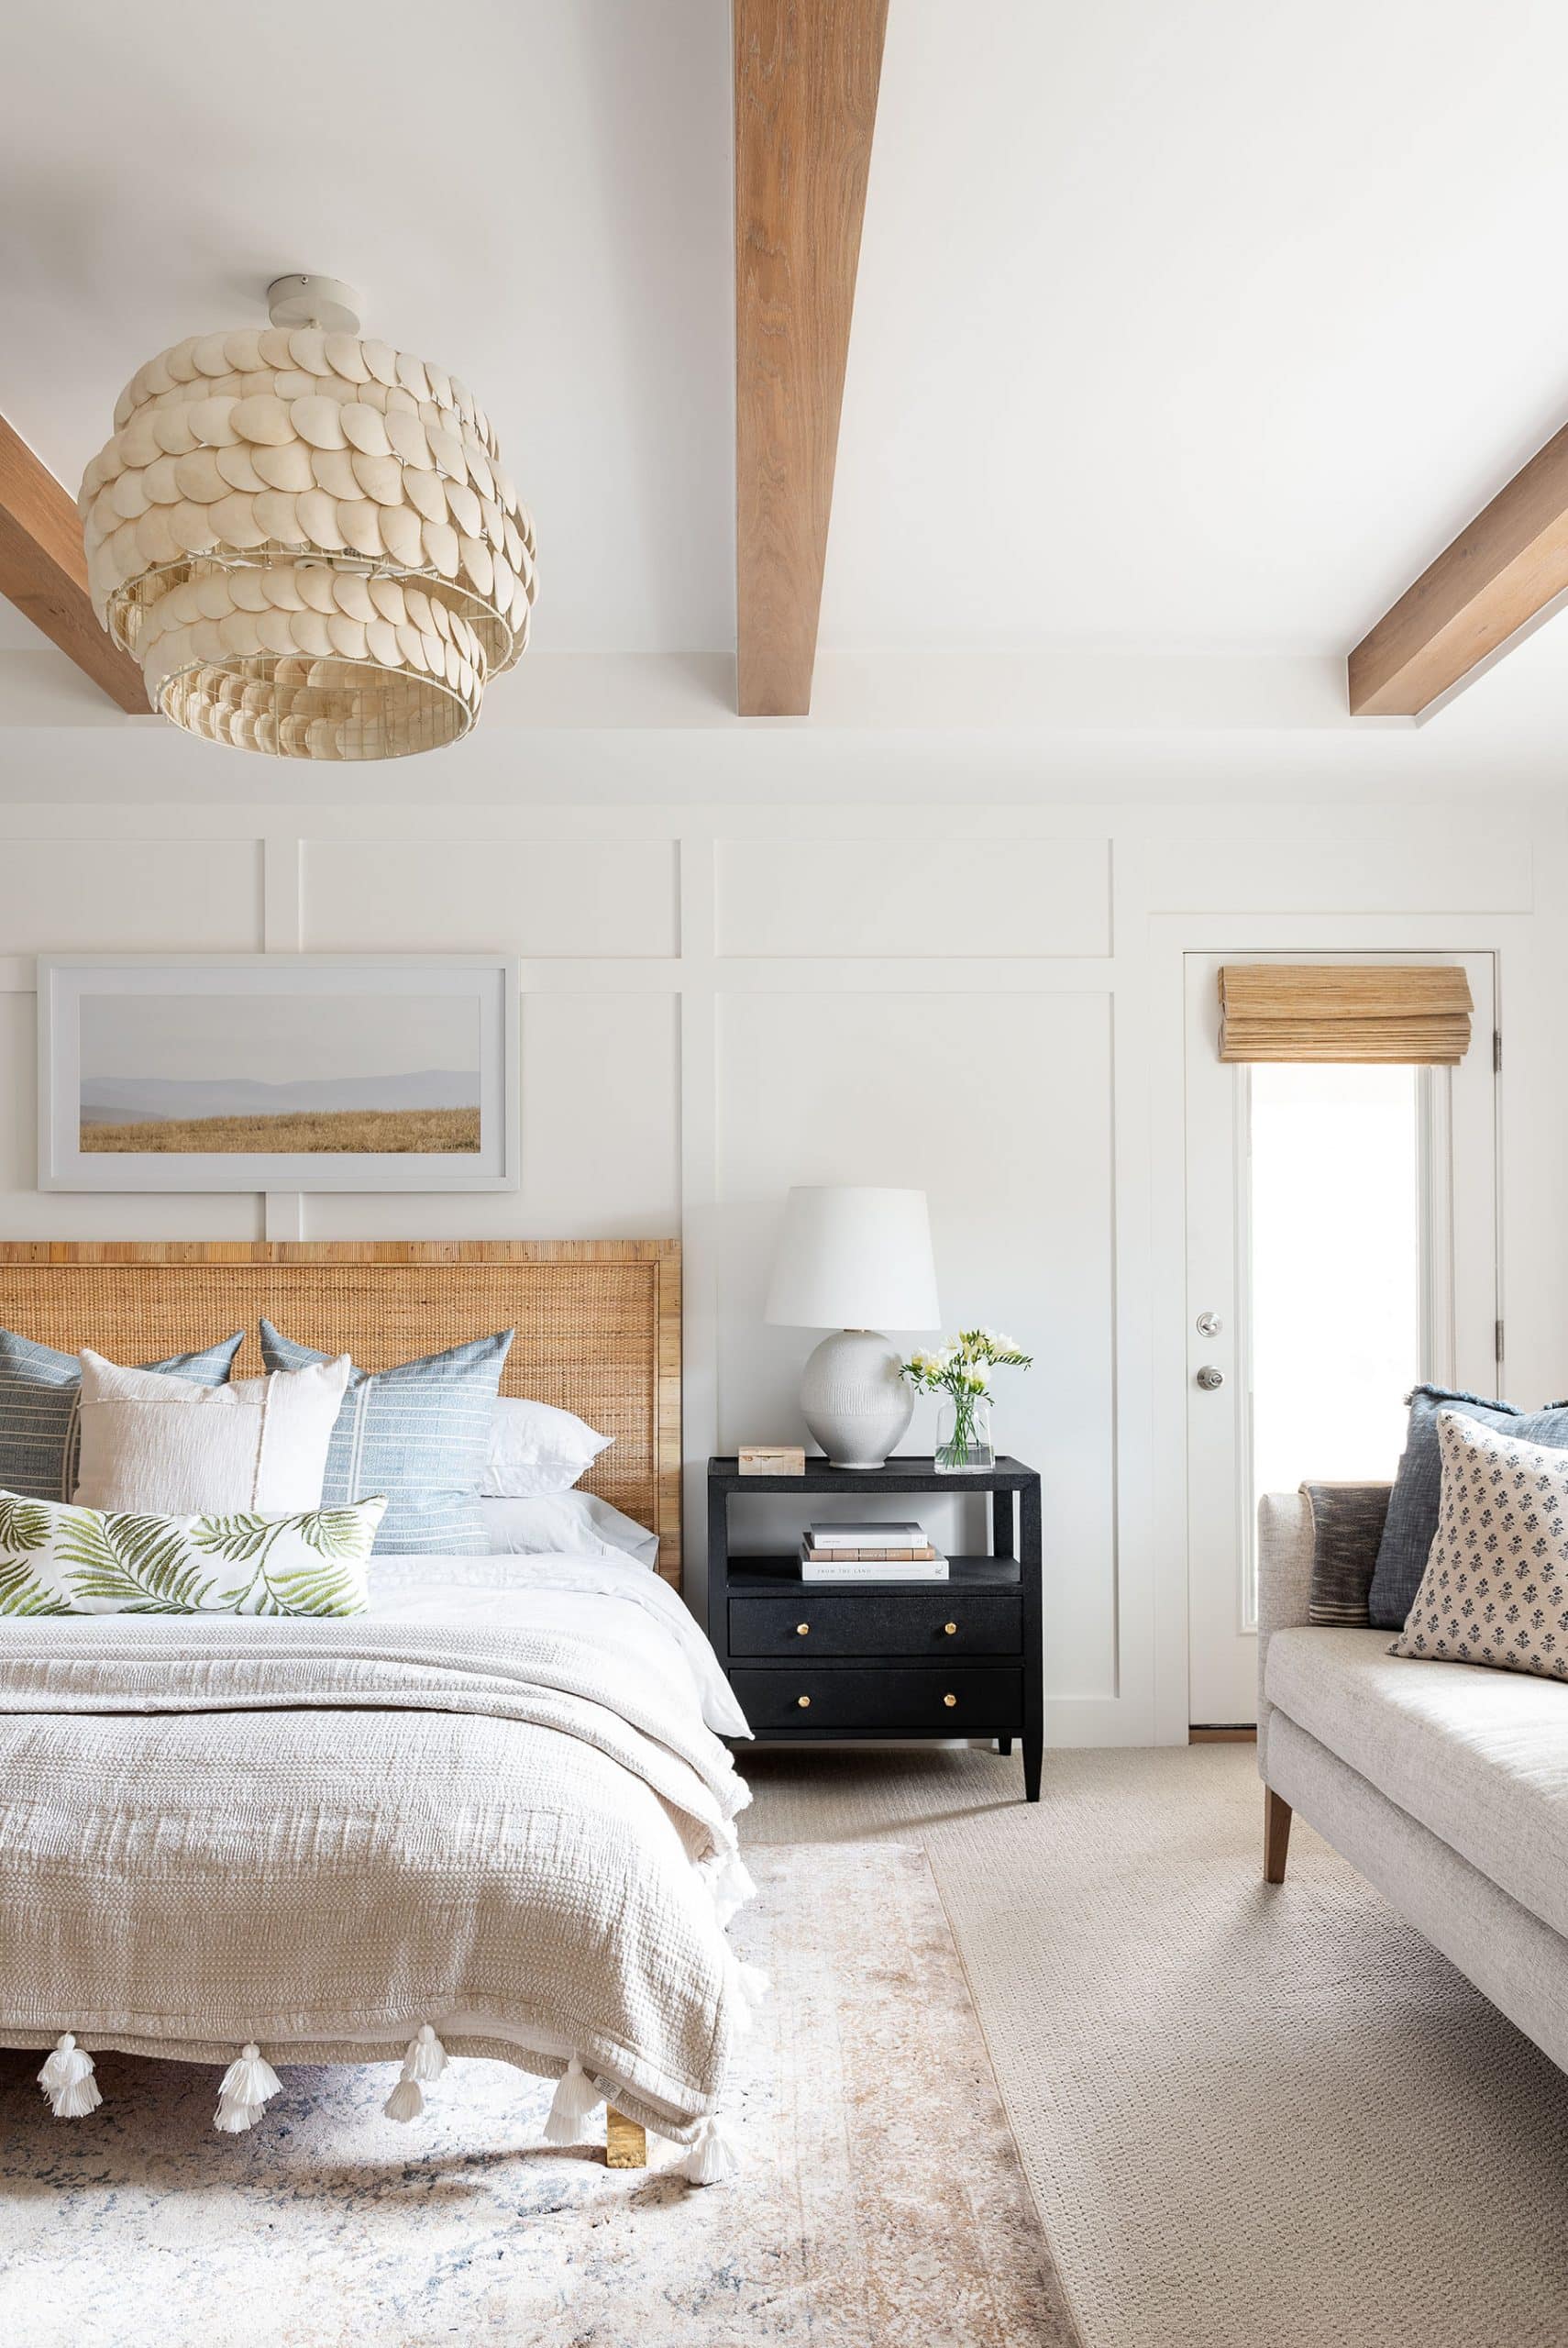 10 Ideas for Decorating Over The Bed